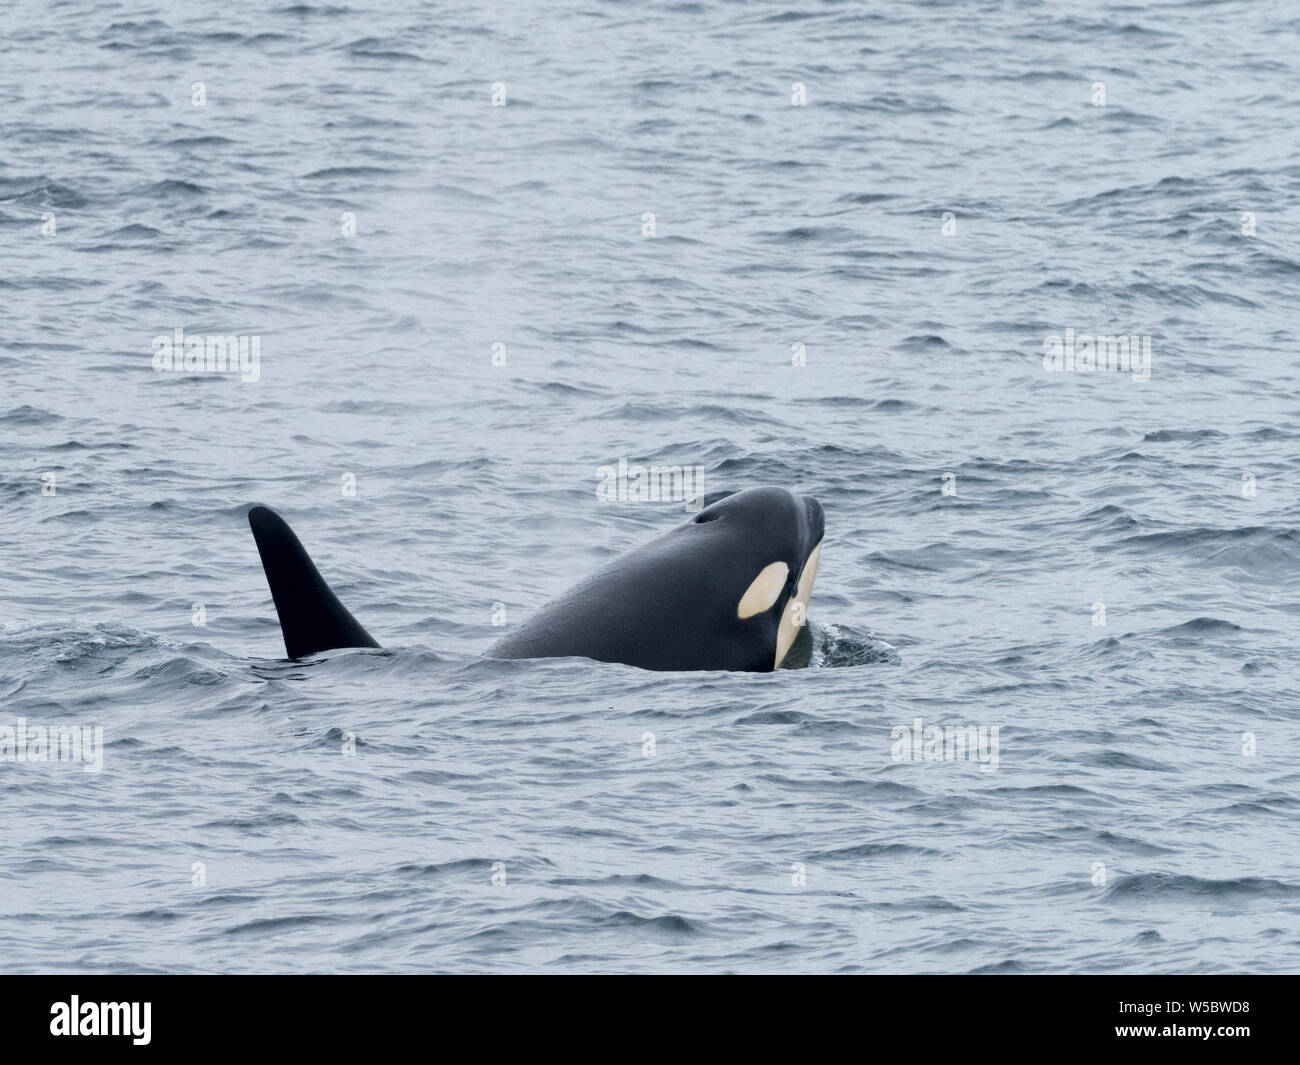 A resident killer whale, Orcinus orca, in the Aleutians of Alaska, USA Stock Photo